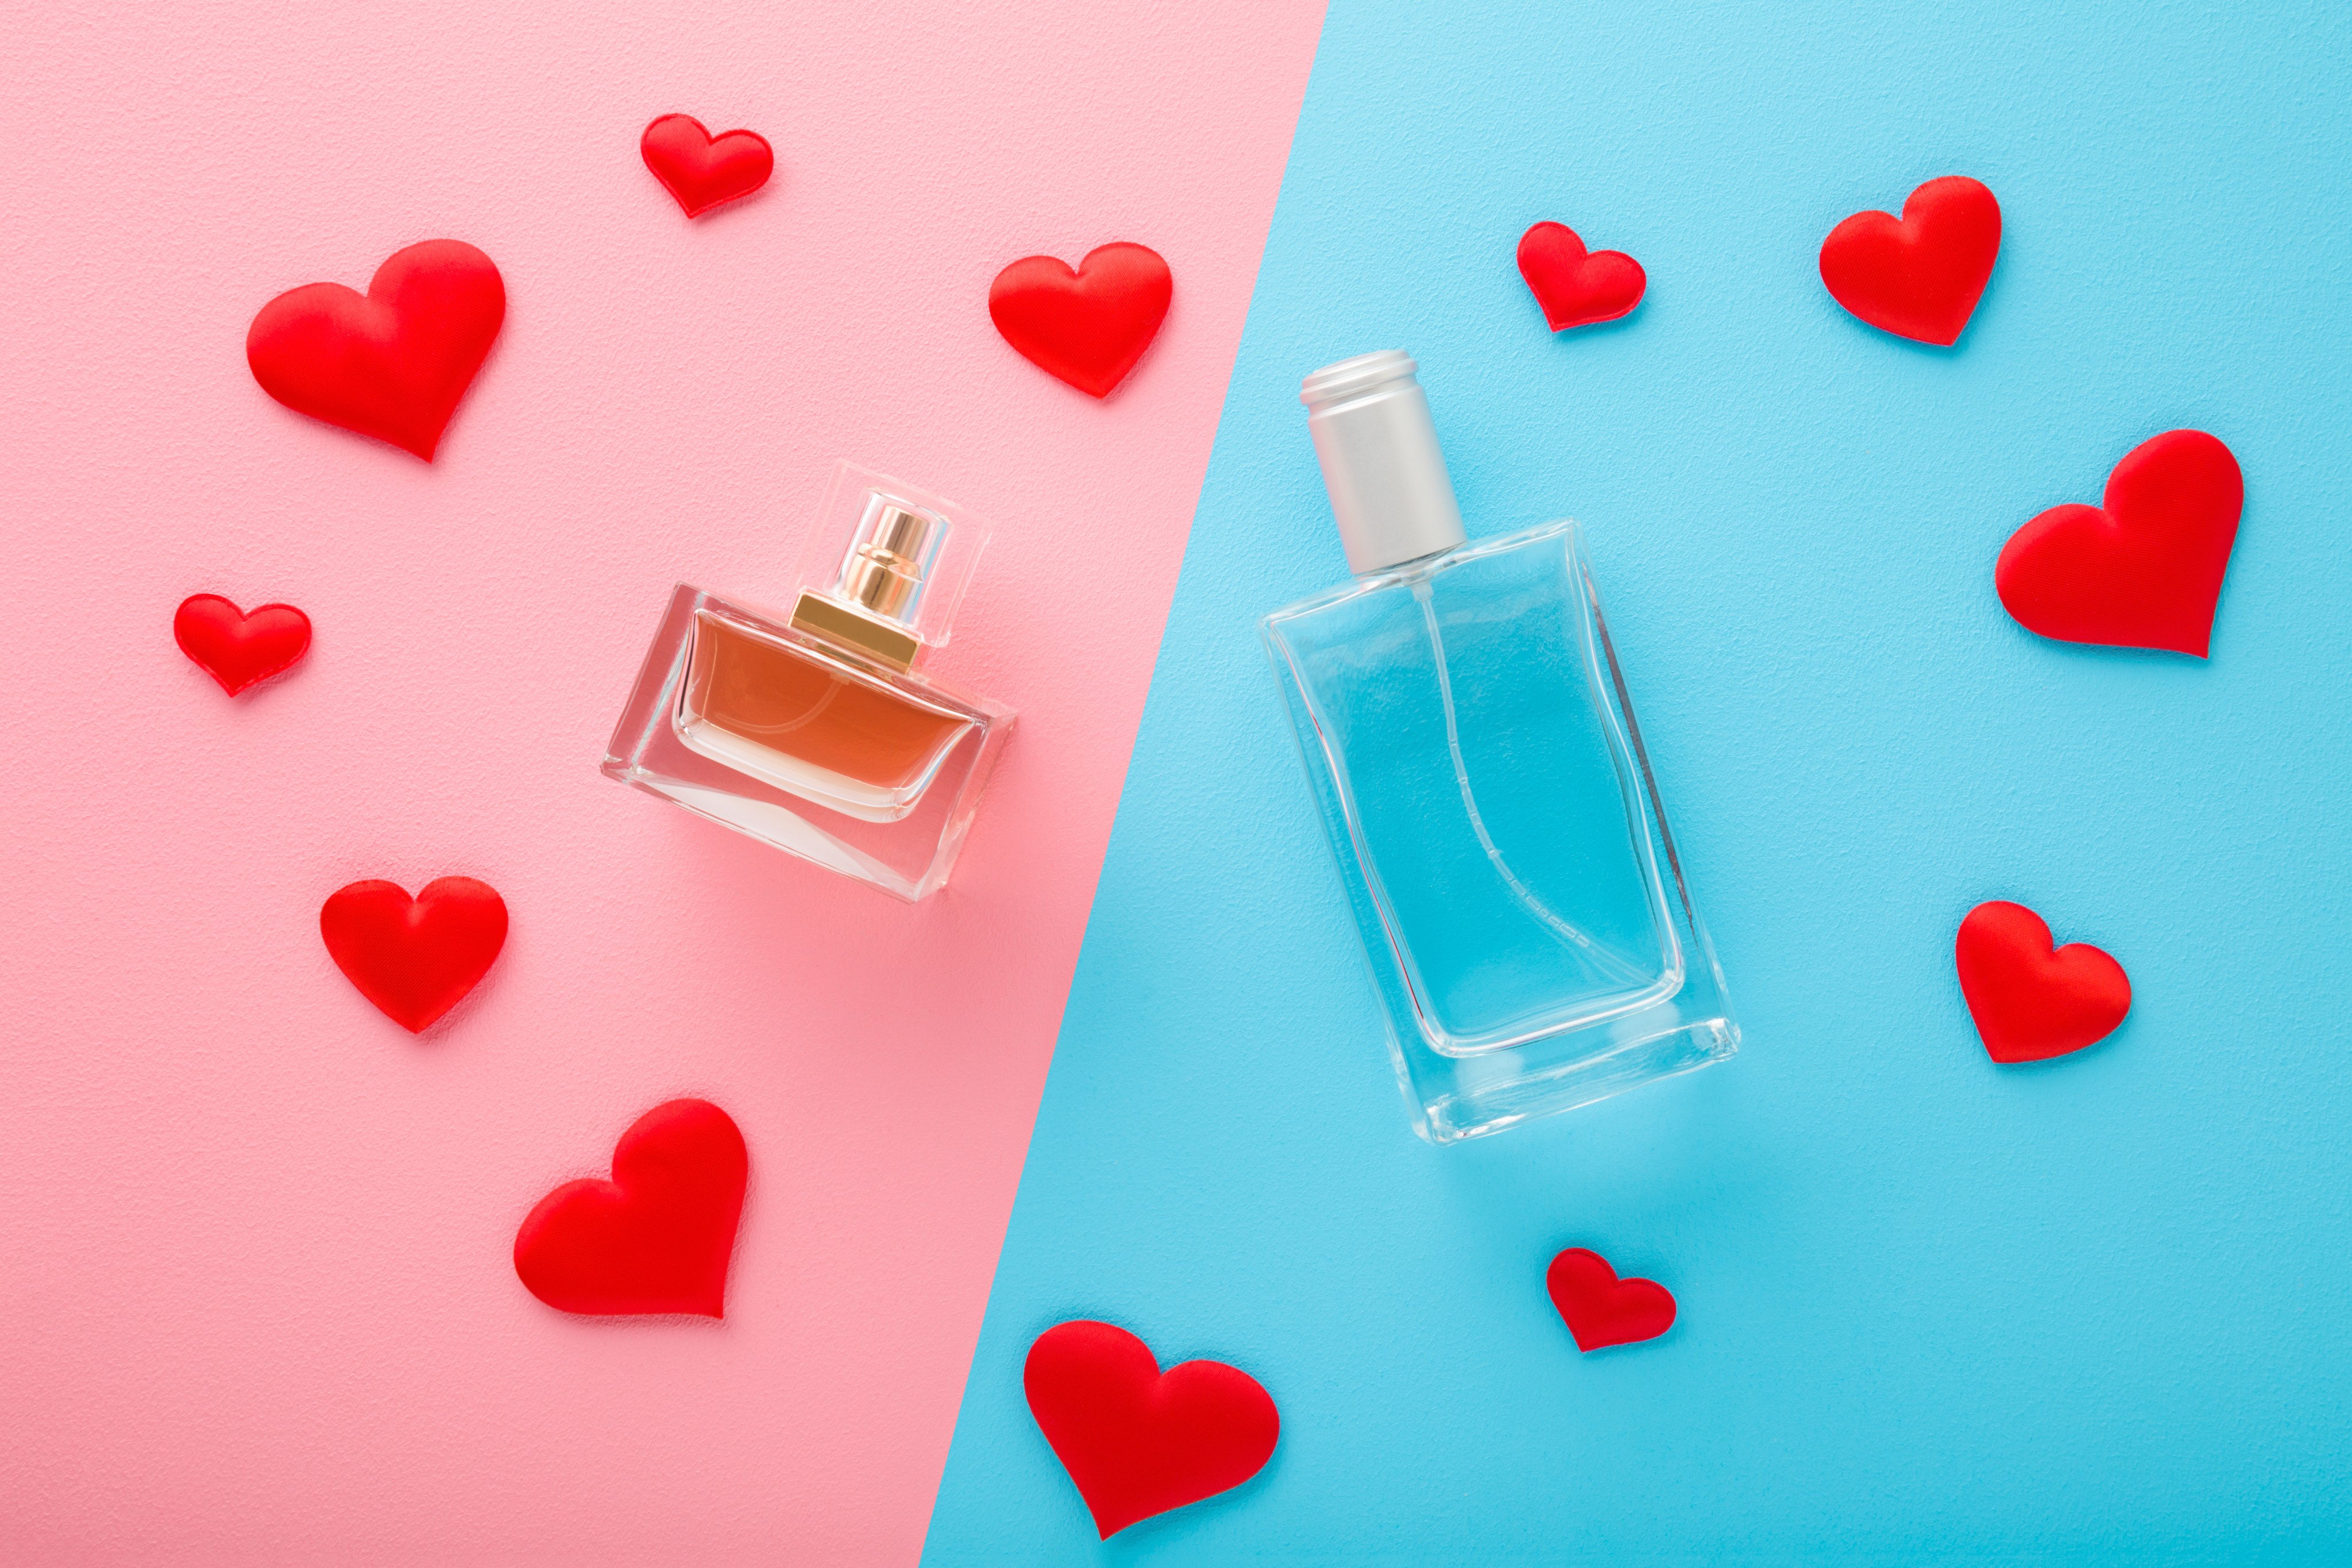 While men’s colognes and women’s perfumes continue to sell, demand for unisex fragrances is rising among Generation Z and millennial consumers who increasingly reject gender labels, experts say. Photo: Shutterstock